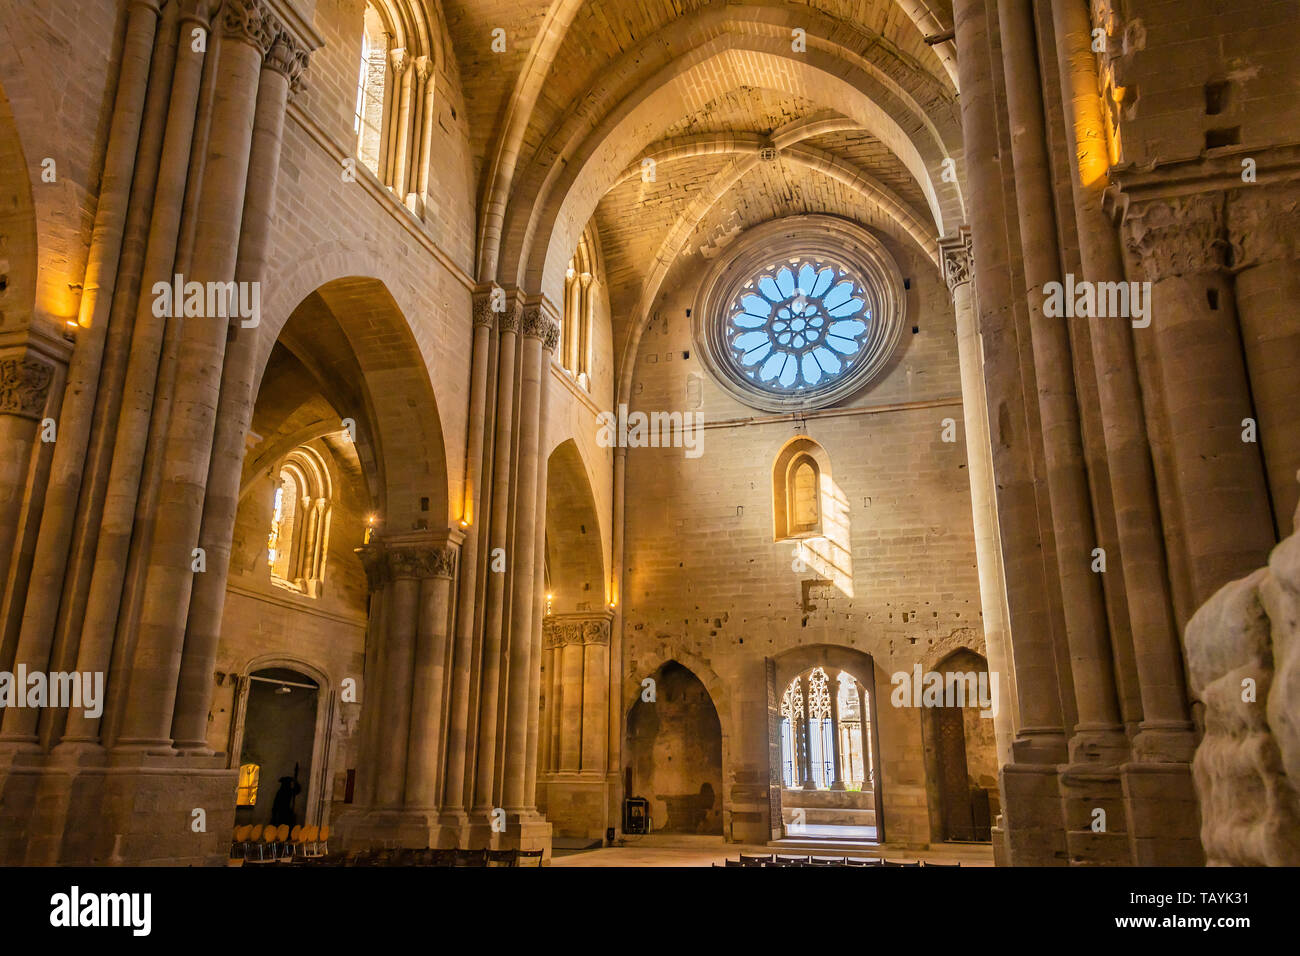 details of the interior of the cathedral La Seu Vella. lleida spain Stock Photo